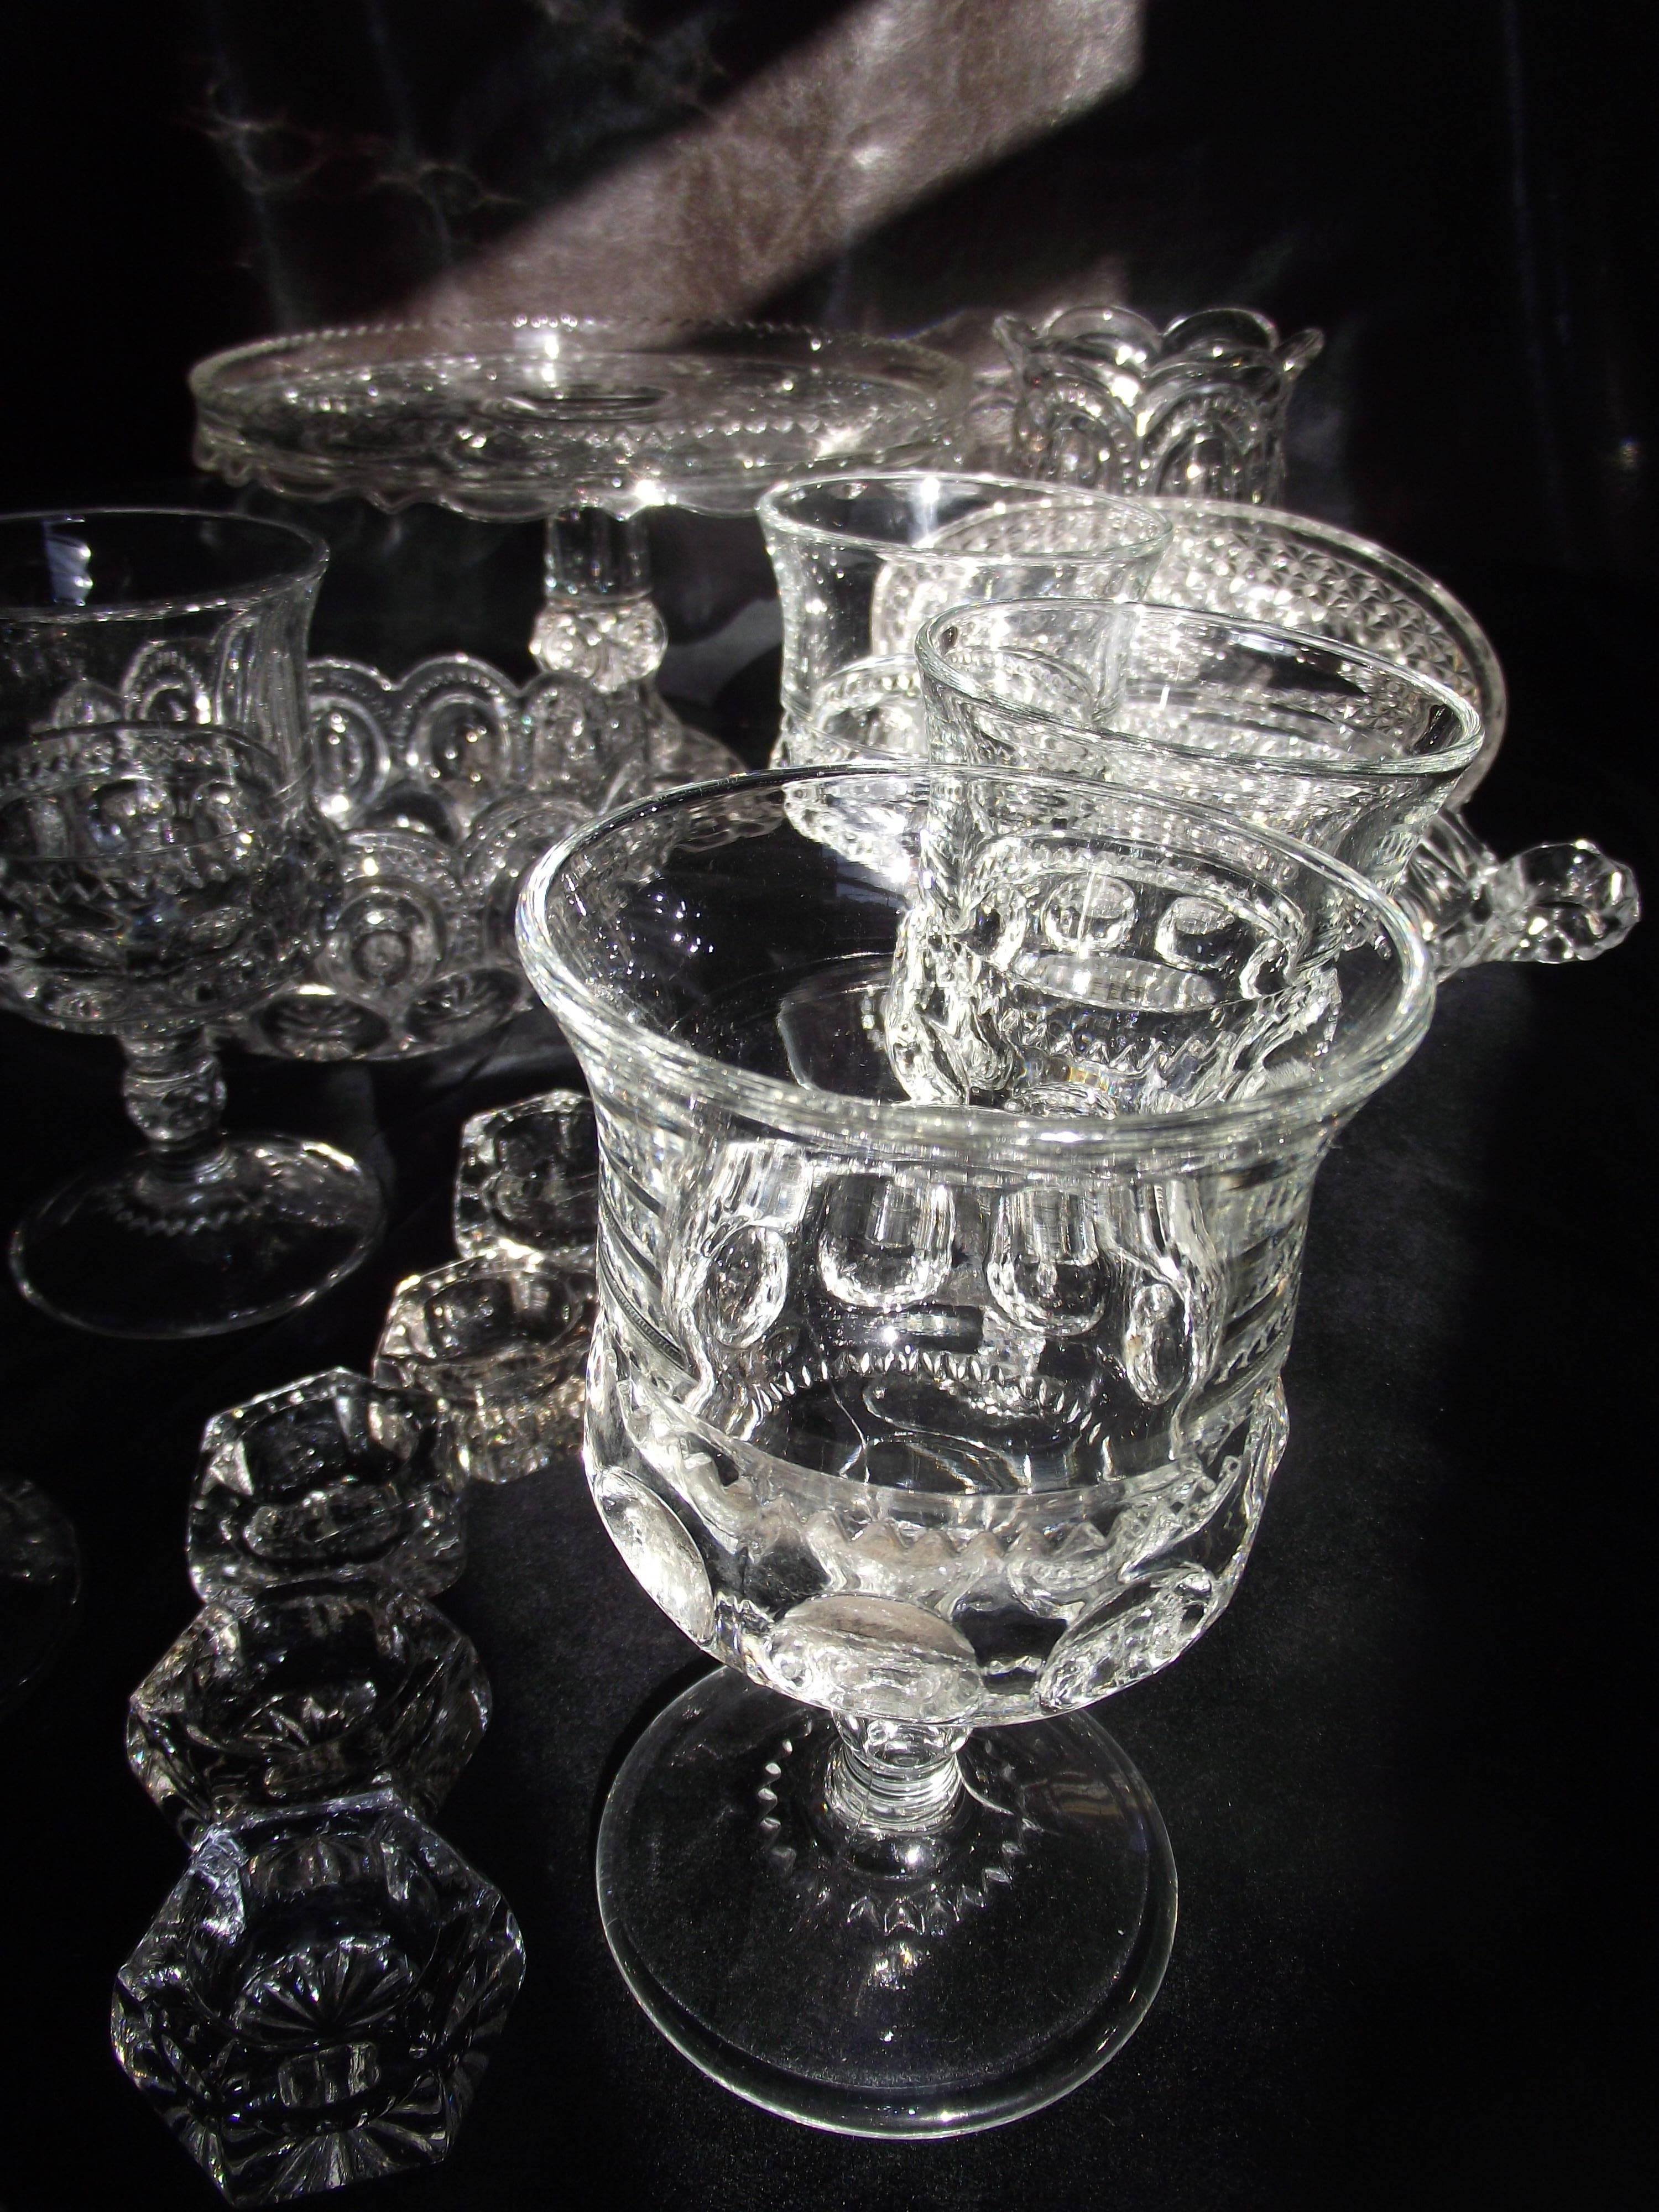 This beautiful group of pressed glass is made up of:
One cake plate 6